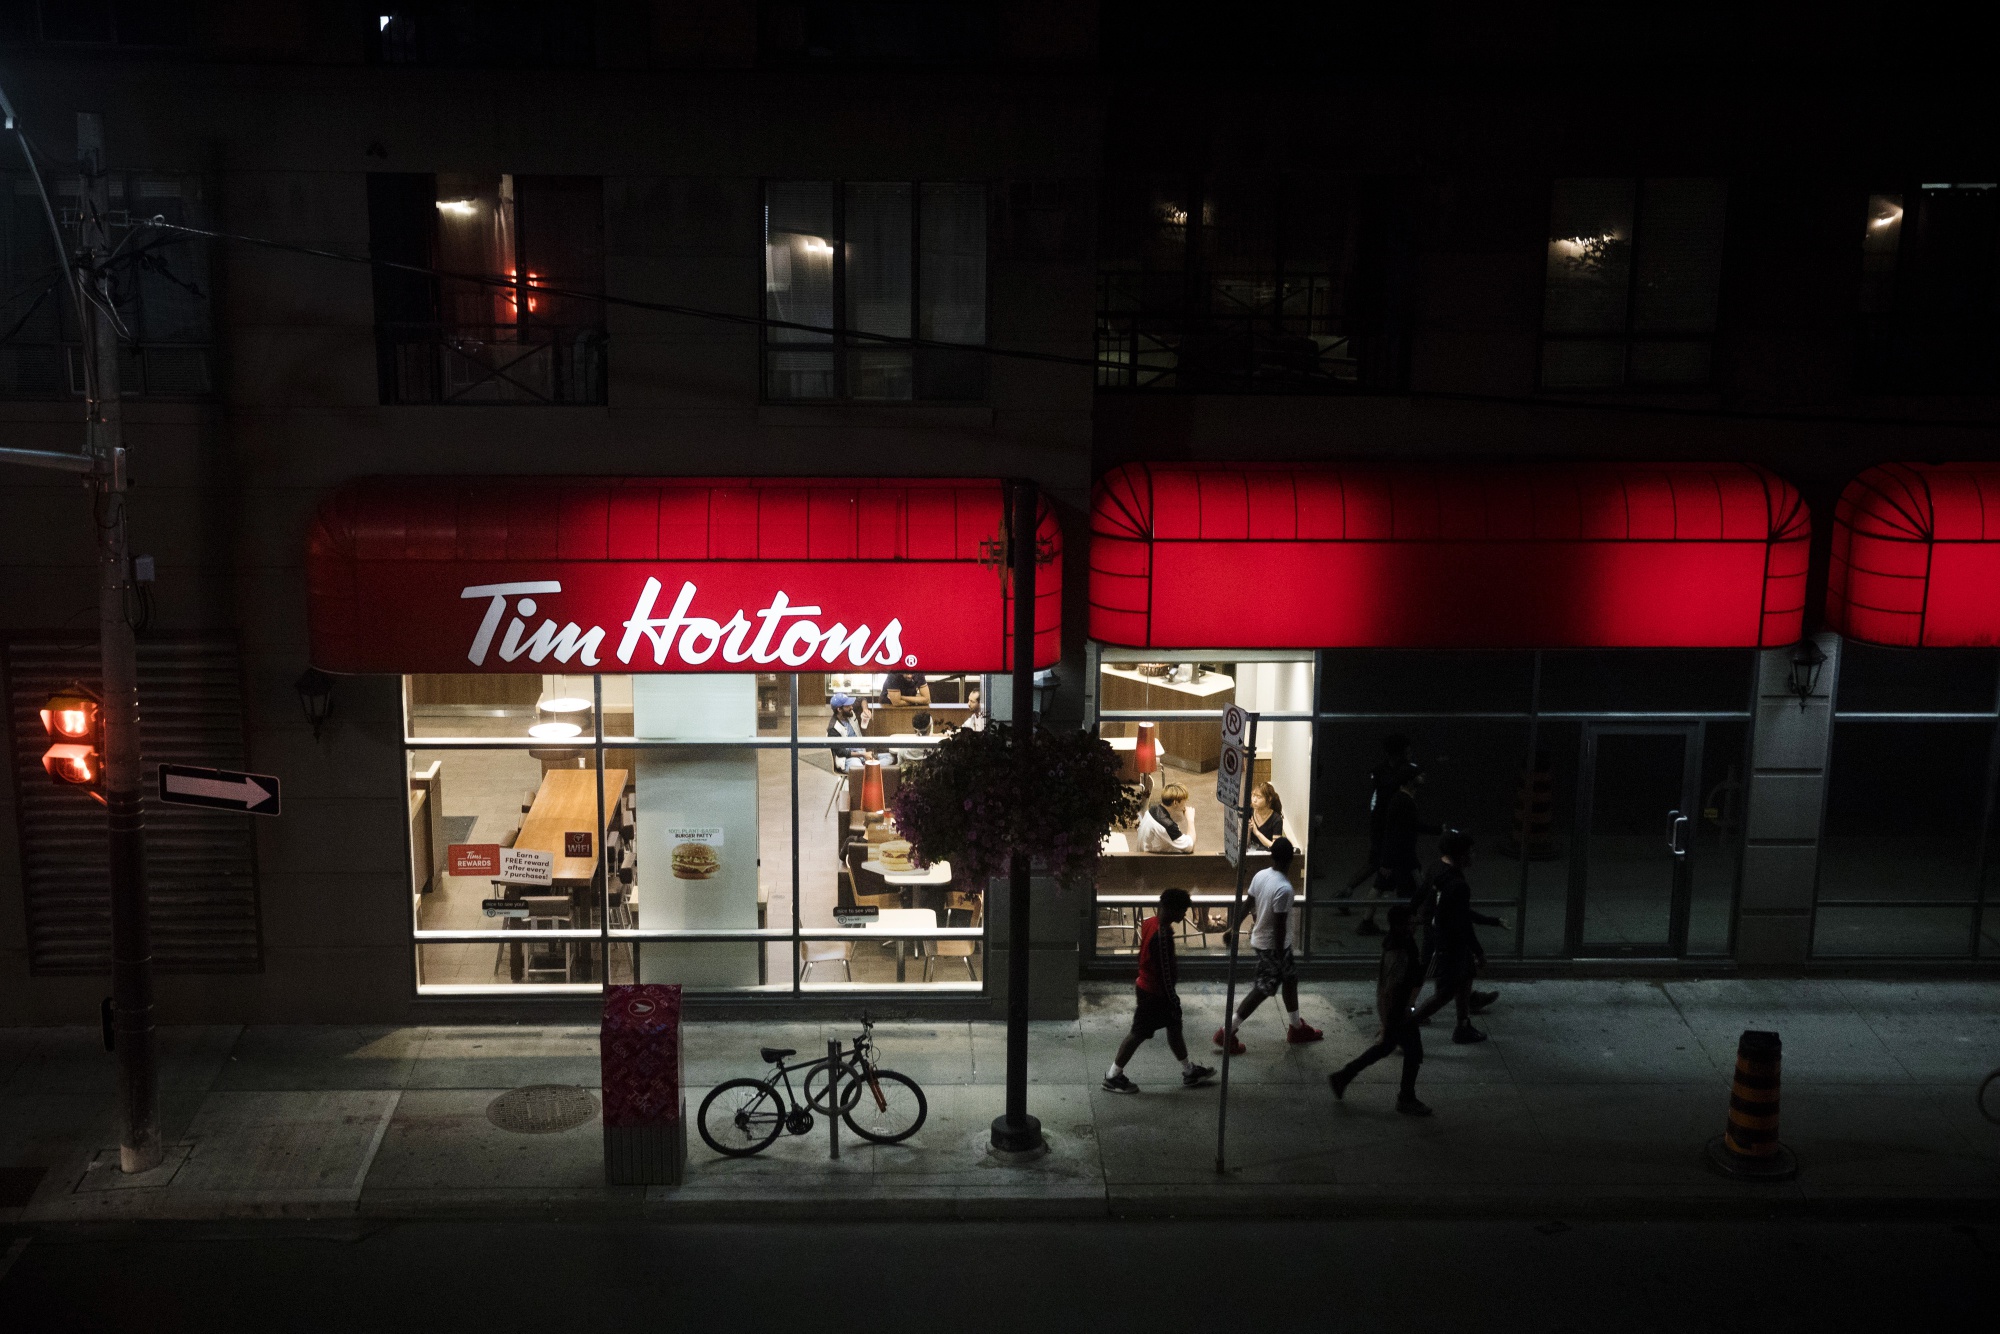 Tim Hortons aiming to keep growth going